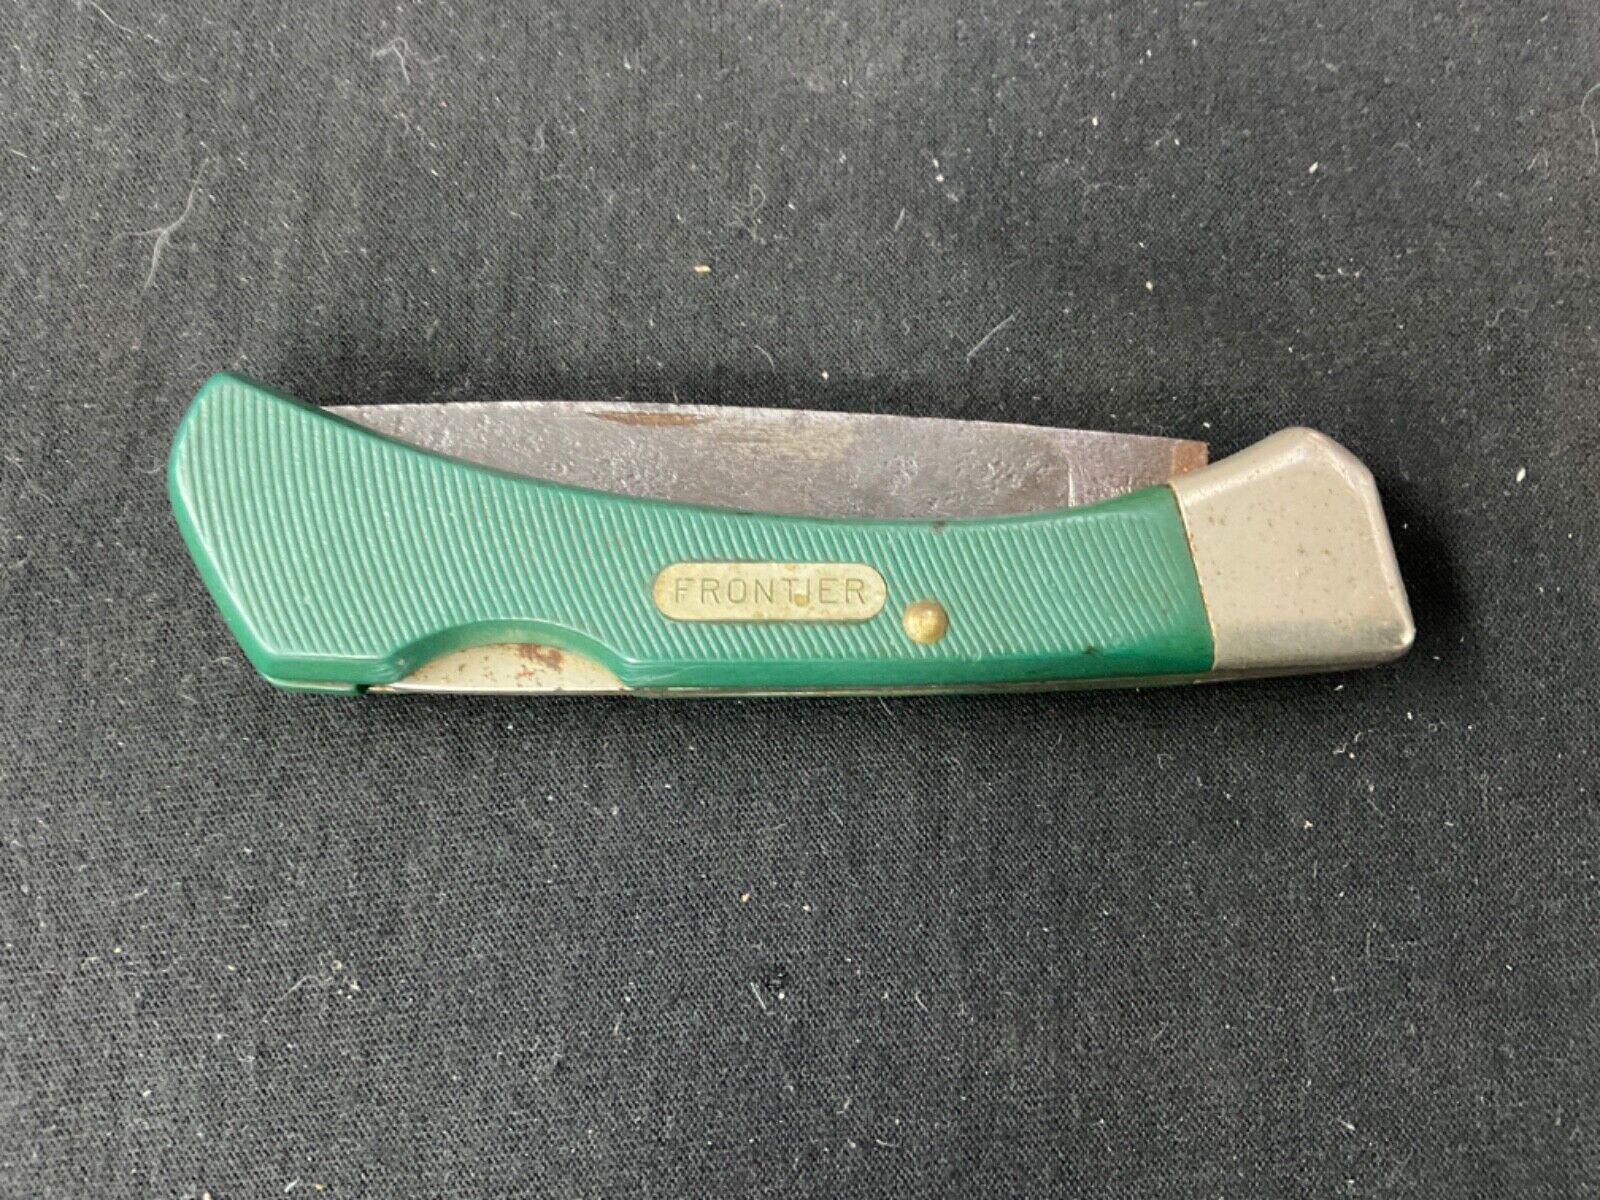 VINTAGE FRONTIER POCKET KNIFE, (MADE IN IRELAND By IMPERIAL, GREEN IN COLOR)